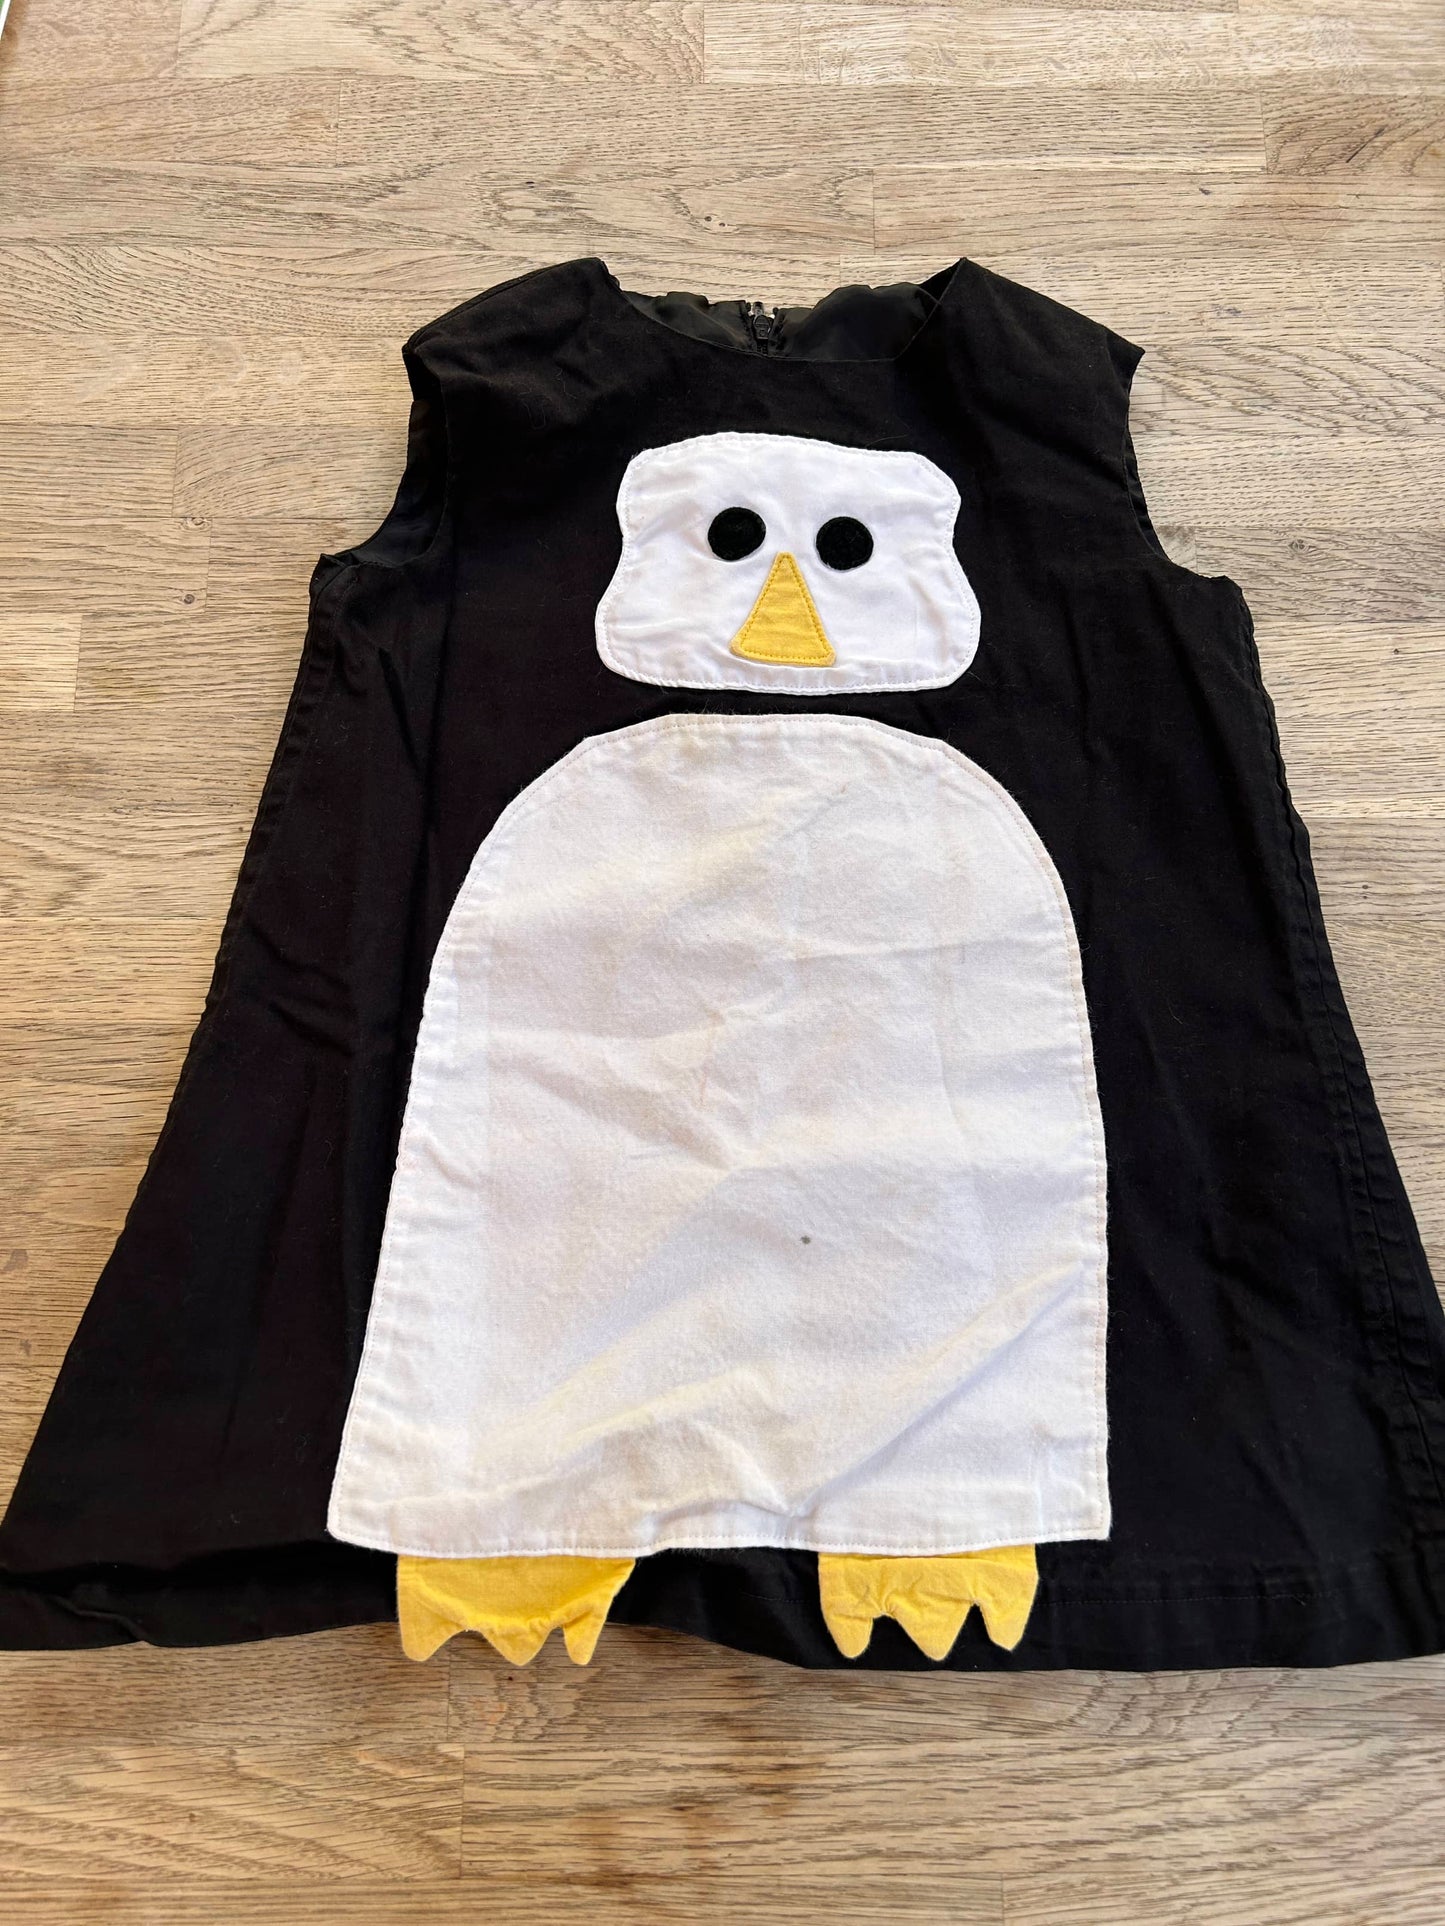 Penguin Tunic Dress/ Top (Pre-Loved) Size 5